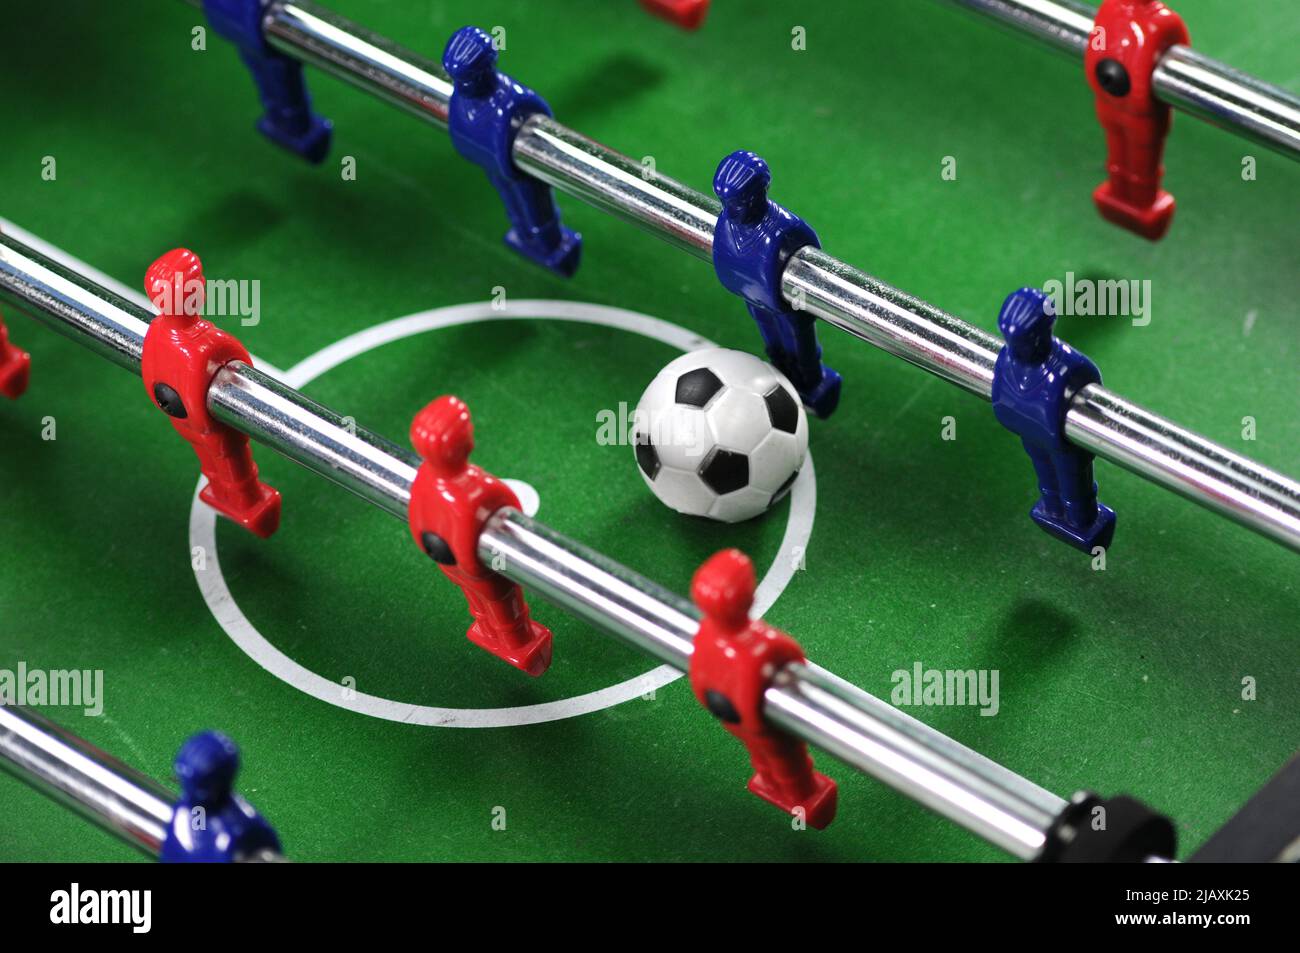 Table football game, or table soccer, close up. Confrontation concept. Stock Photo